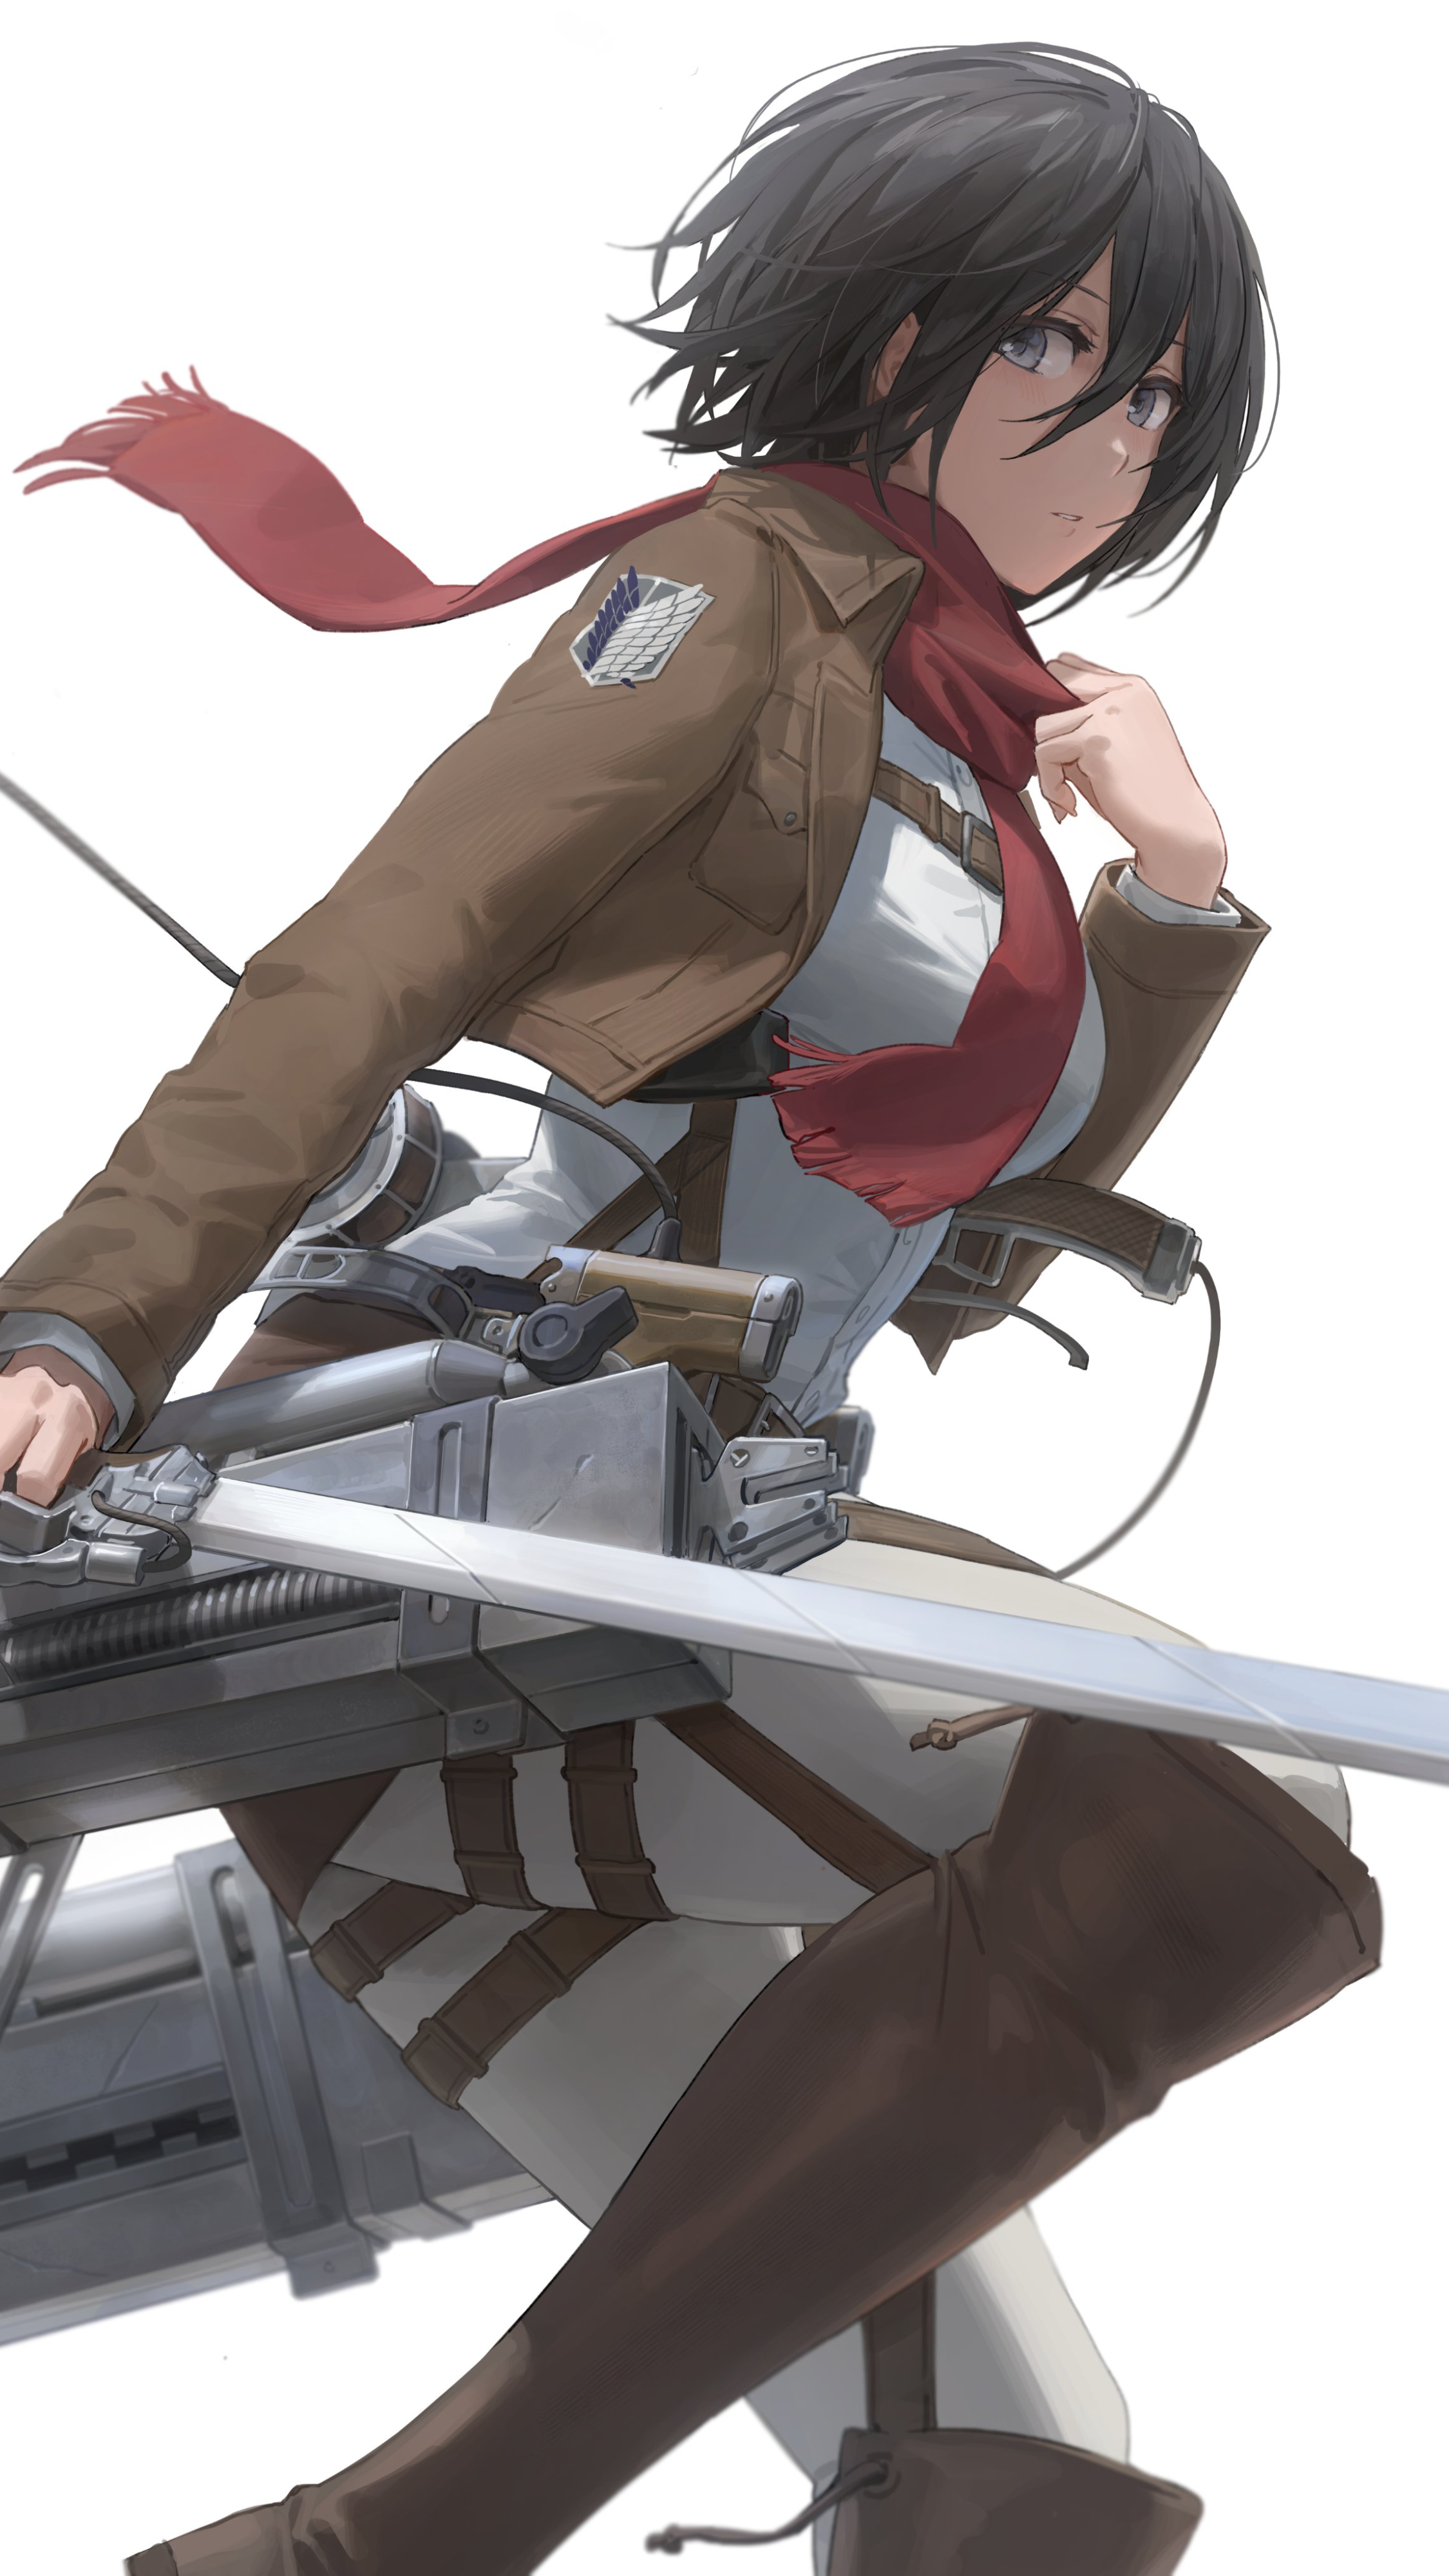 Anime 2250x4000 Mikasa Ackerman anime girls anime dark hair simple background looking at viewer women with swords